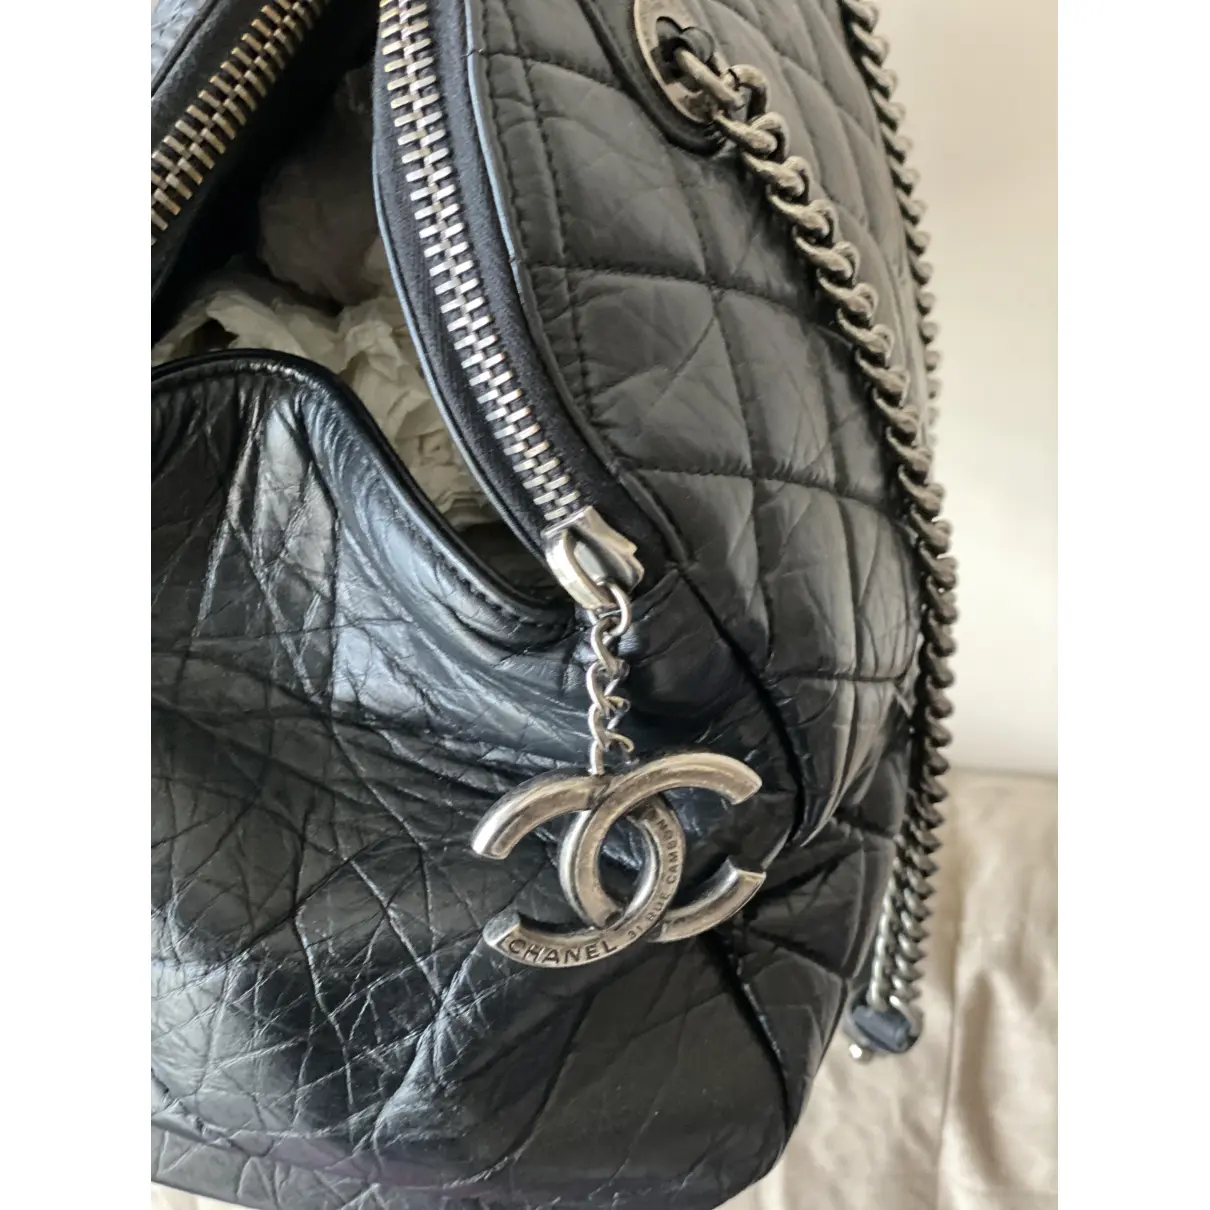 Mademoiselle leather bowling bag Chanel